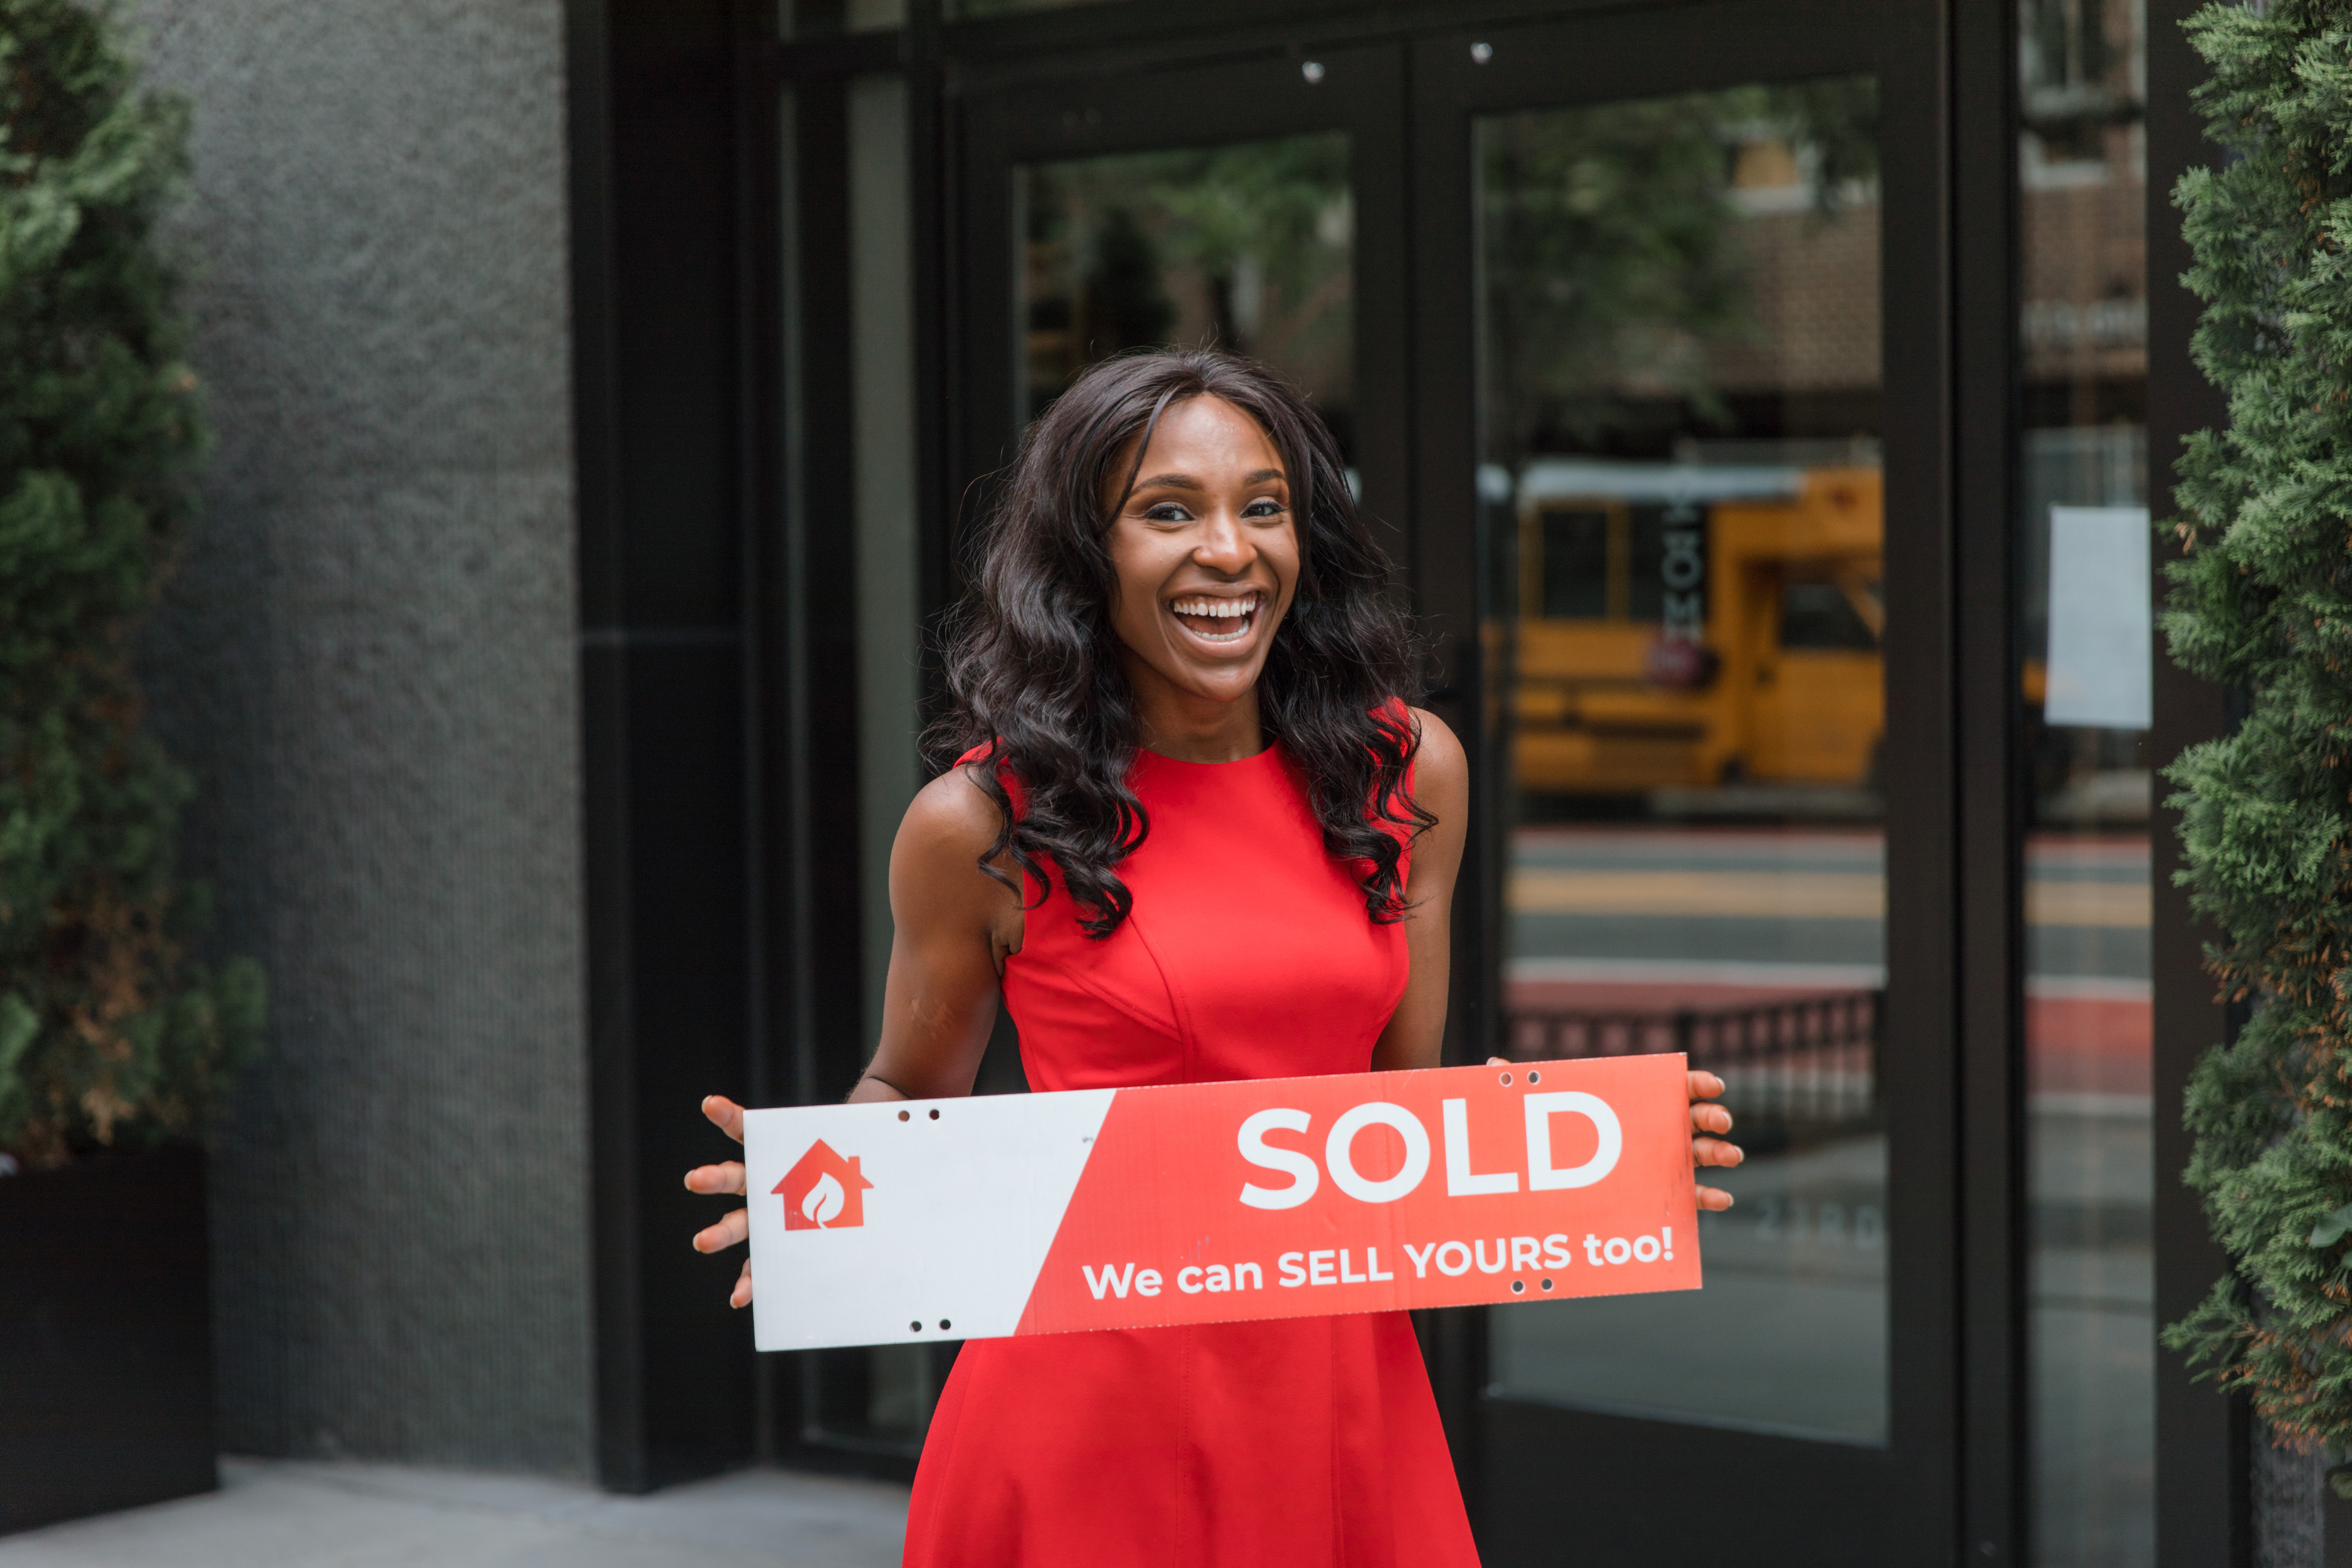 ocr-woman-holding-sold-sign.jpg